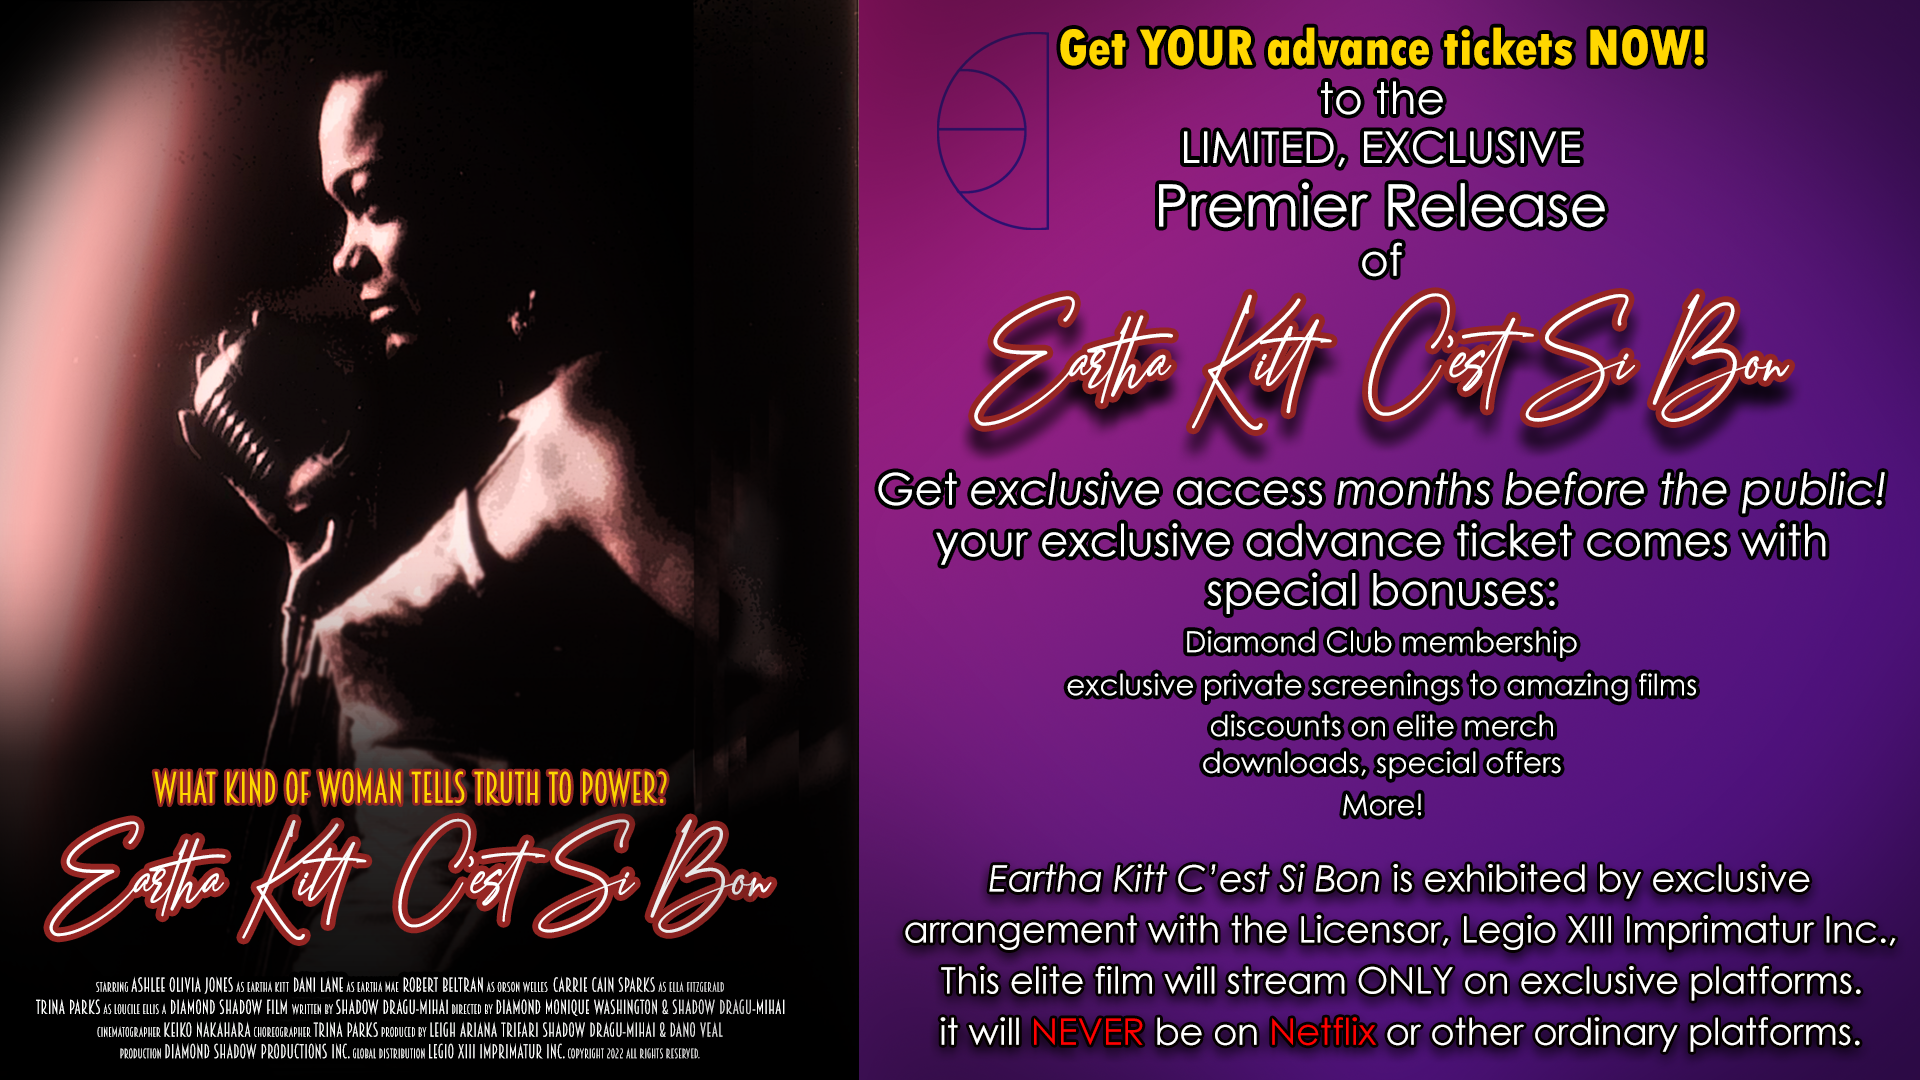 Photo for Eartha Kitt C'est Si Bon - ADVANCE TICKETS to Exclusive Premier Streaming Release on ViewStub